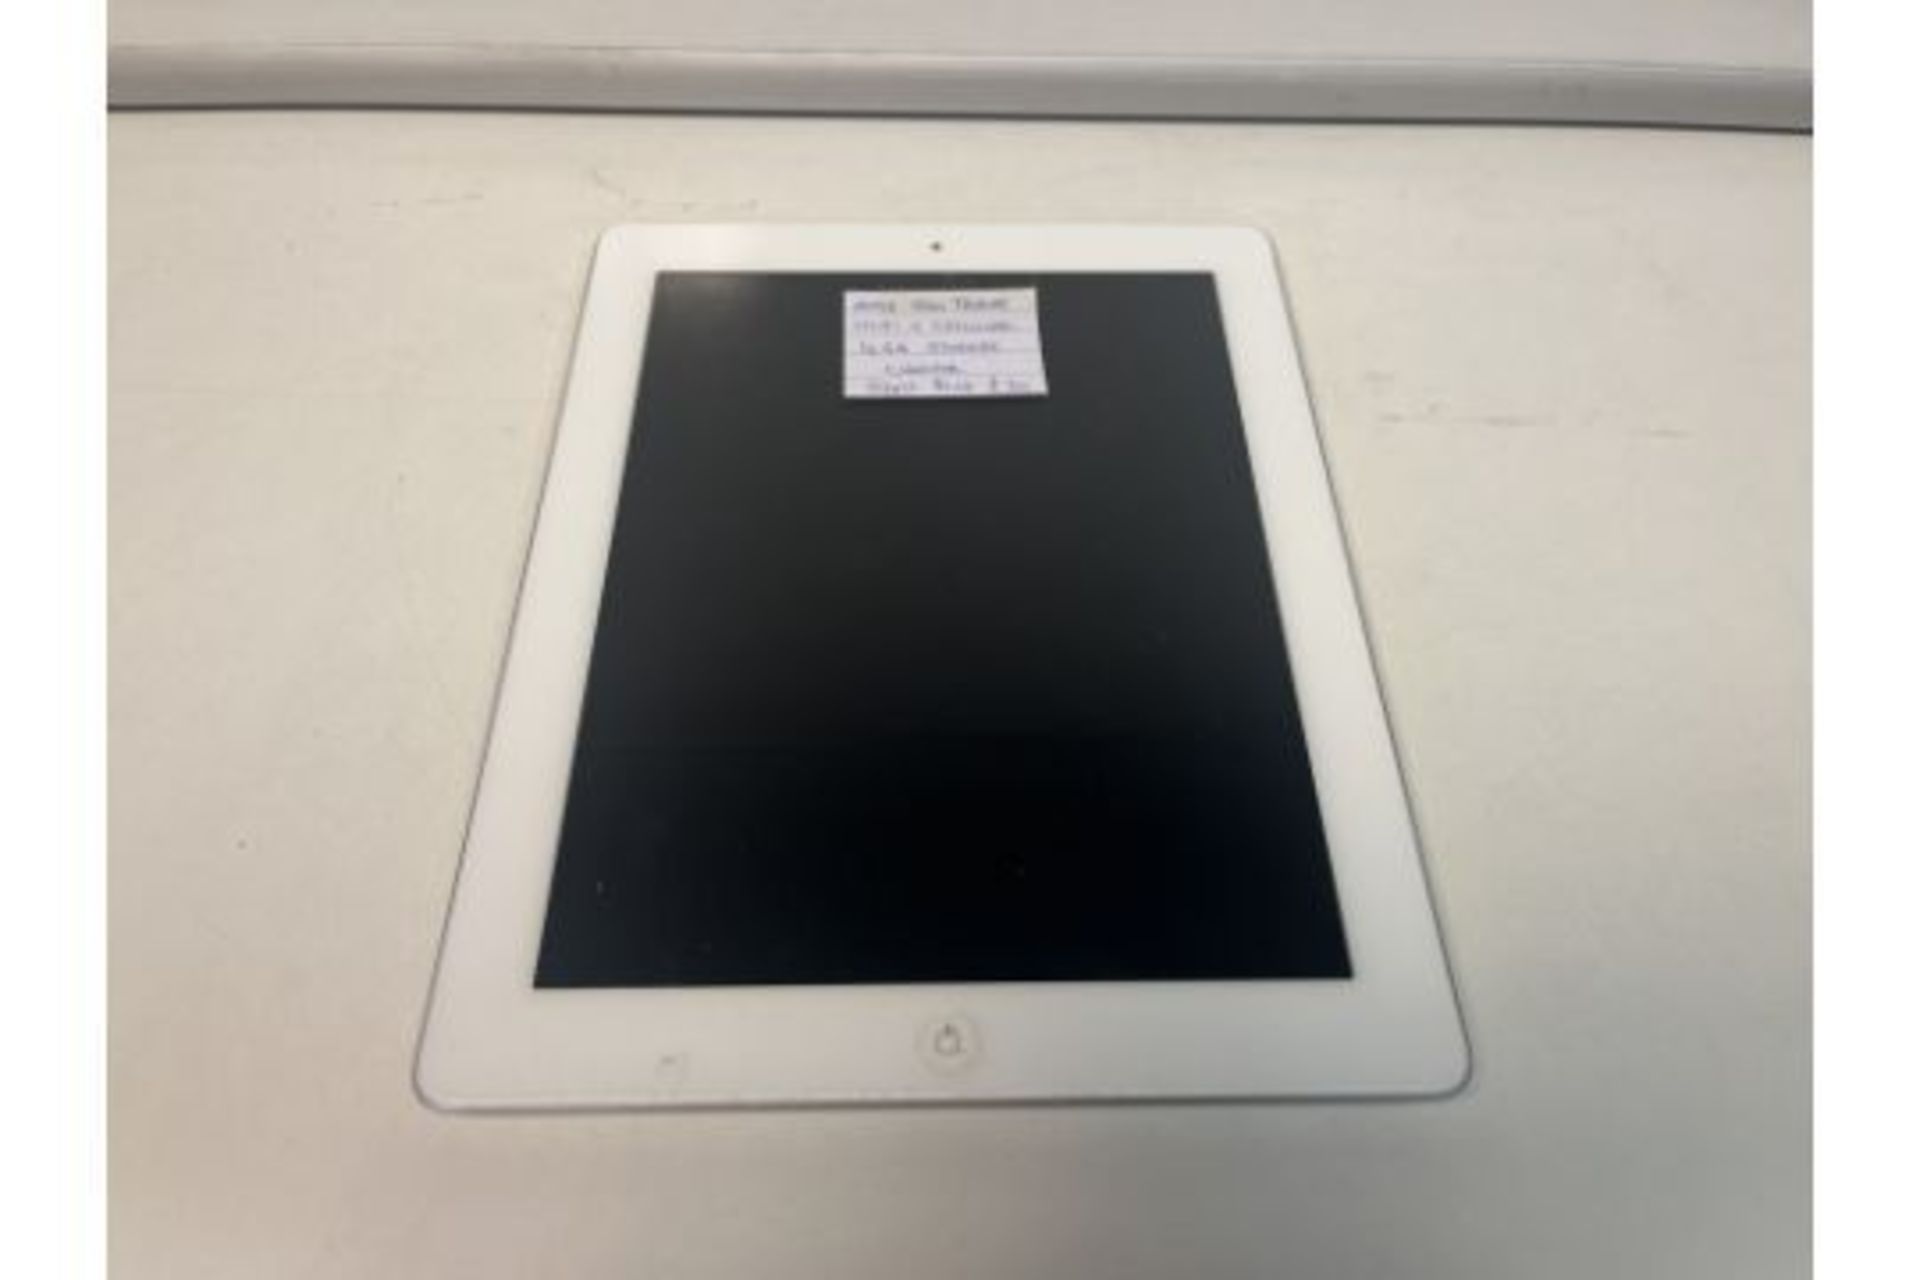 APPLE I PAD TABLET, WIFI AND CELLULAR, 16GB STORAGE WITH CHARGER (27) 176